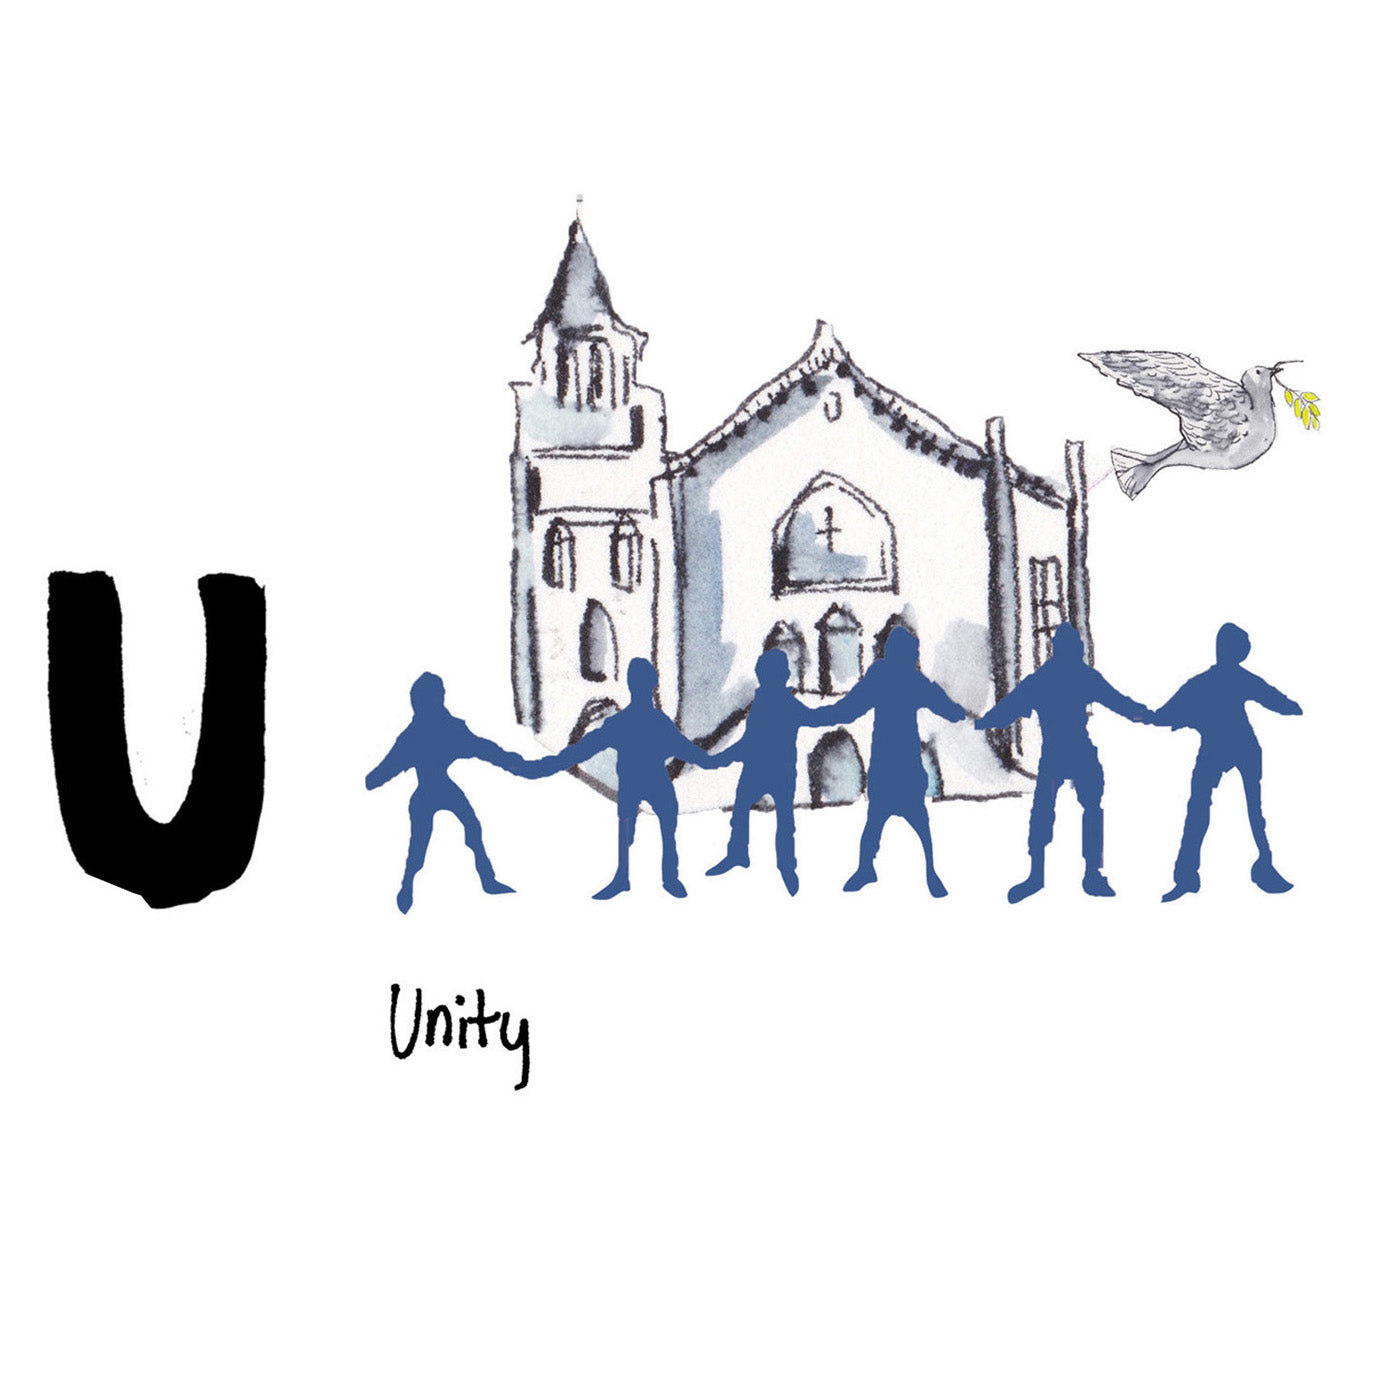 U is for Unity. The city of Charleston has come together and shown incredible resilience after the devastating shooting at the Emanuel African Methodist Episcopal Church in 2015. The victims will always be remembered.